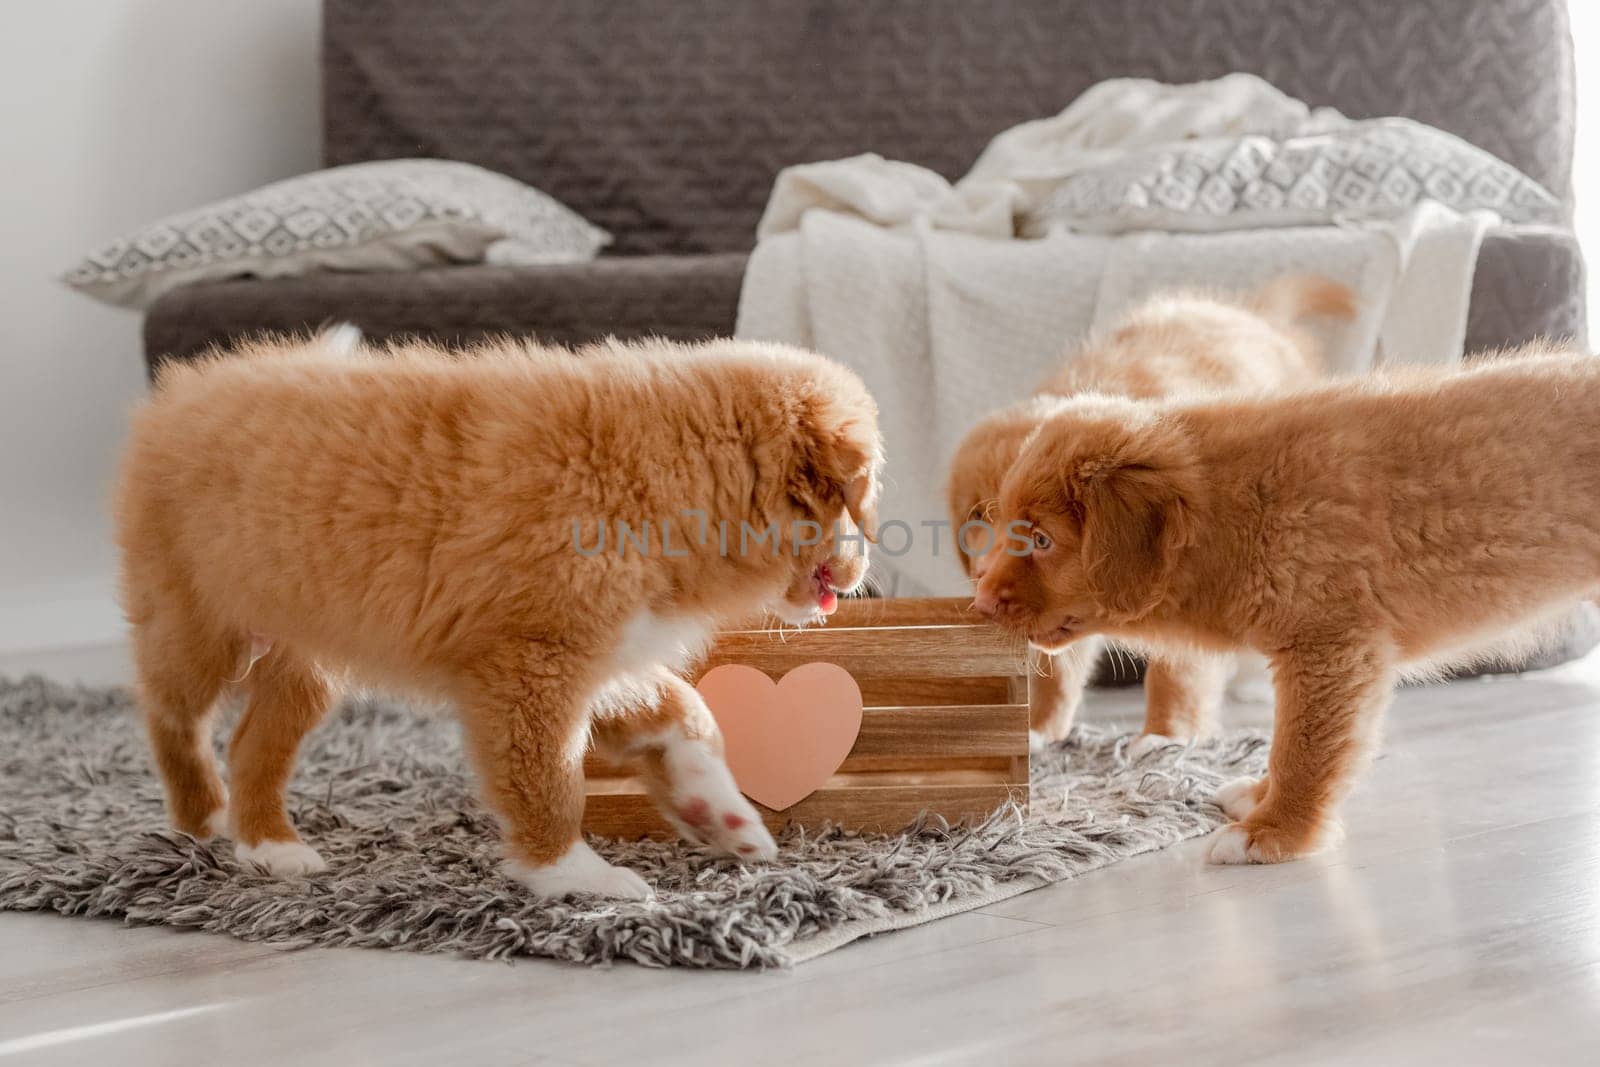 Toller Puppies Play With Wooden Box On Room Floor by tan4ikk1